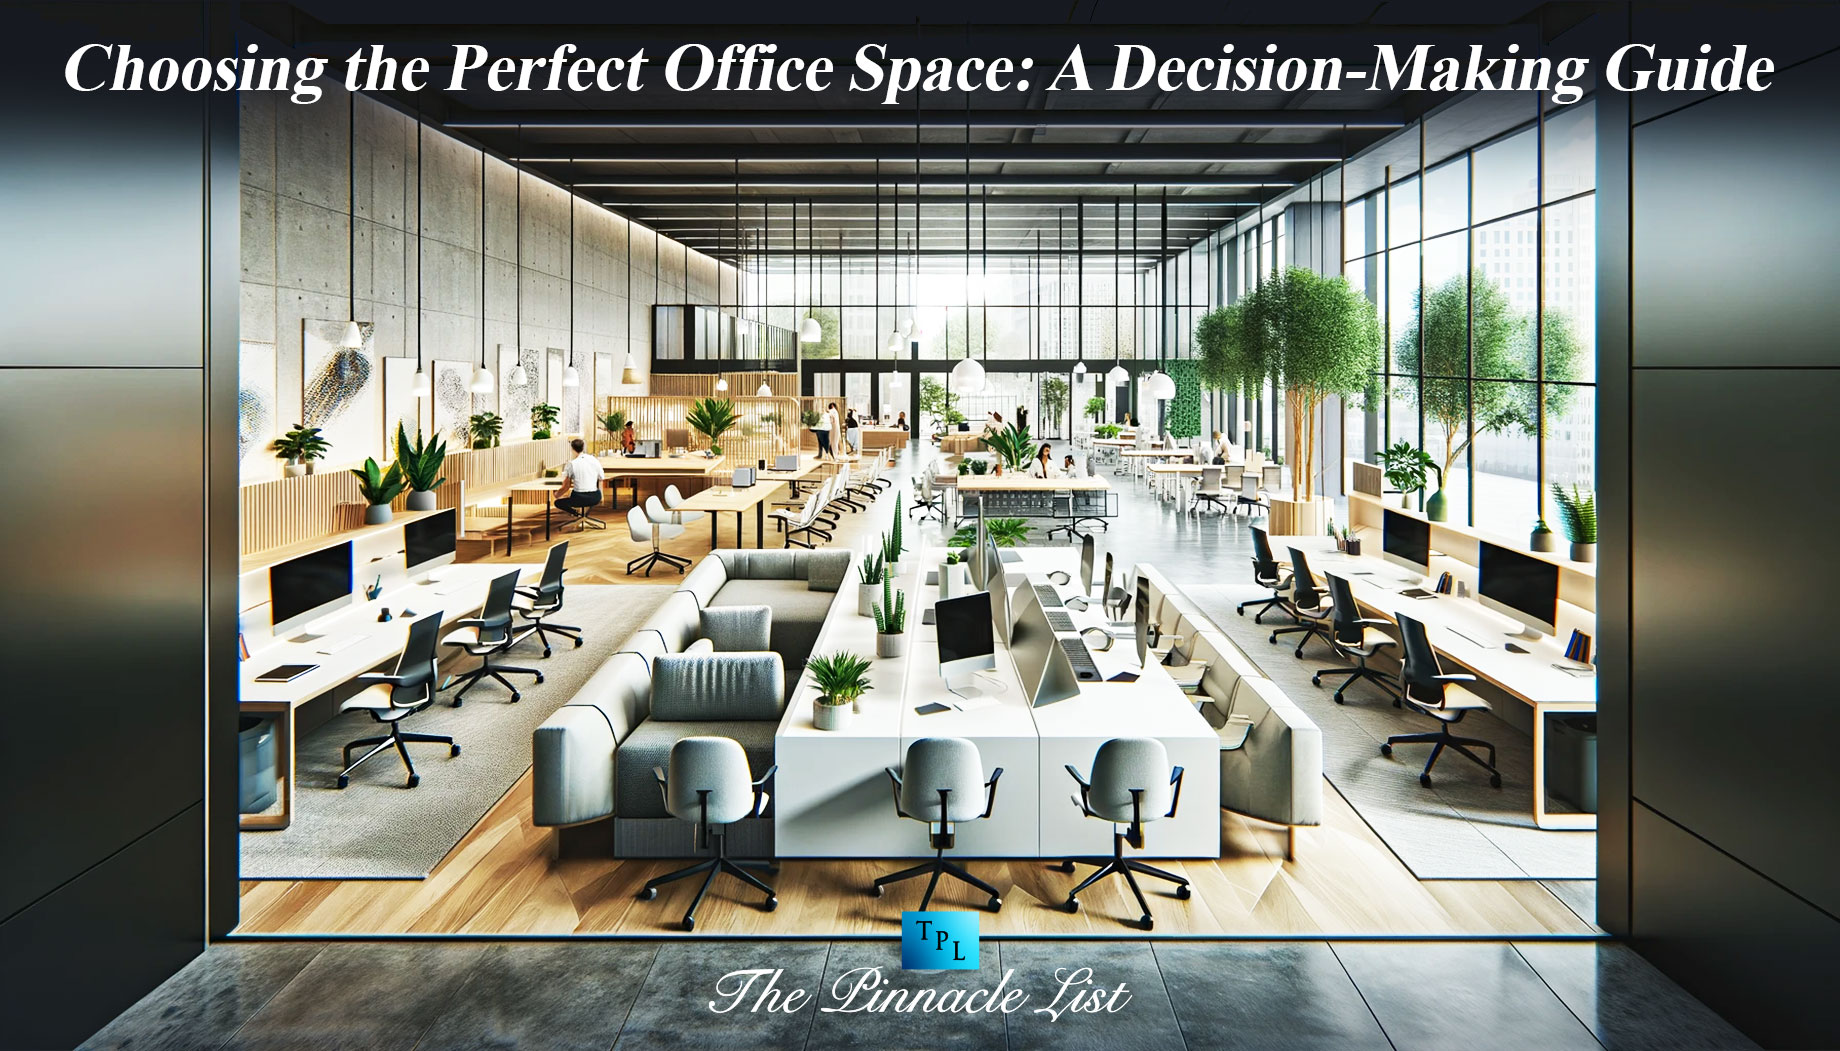 Choosing the Perfect Office Space: A Decision-Making Guide